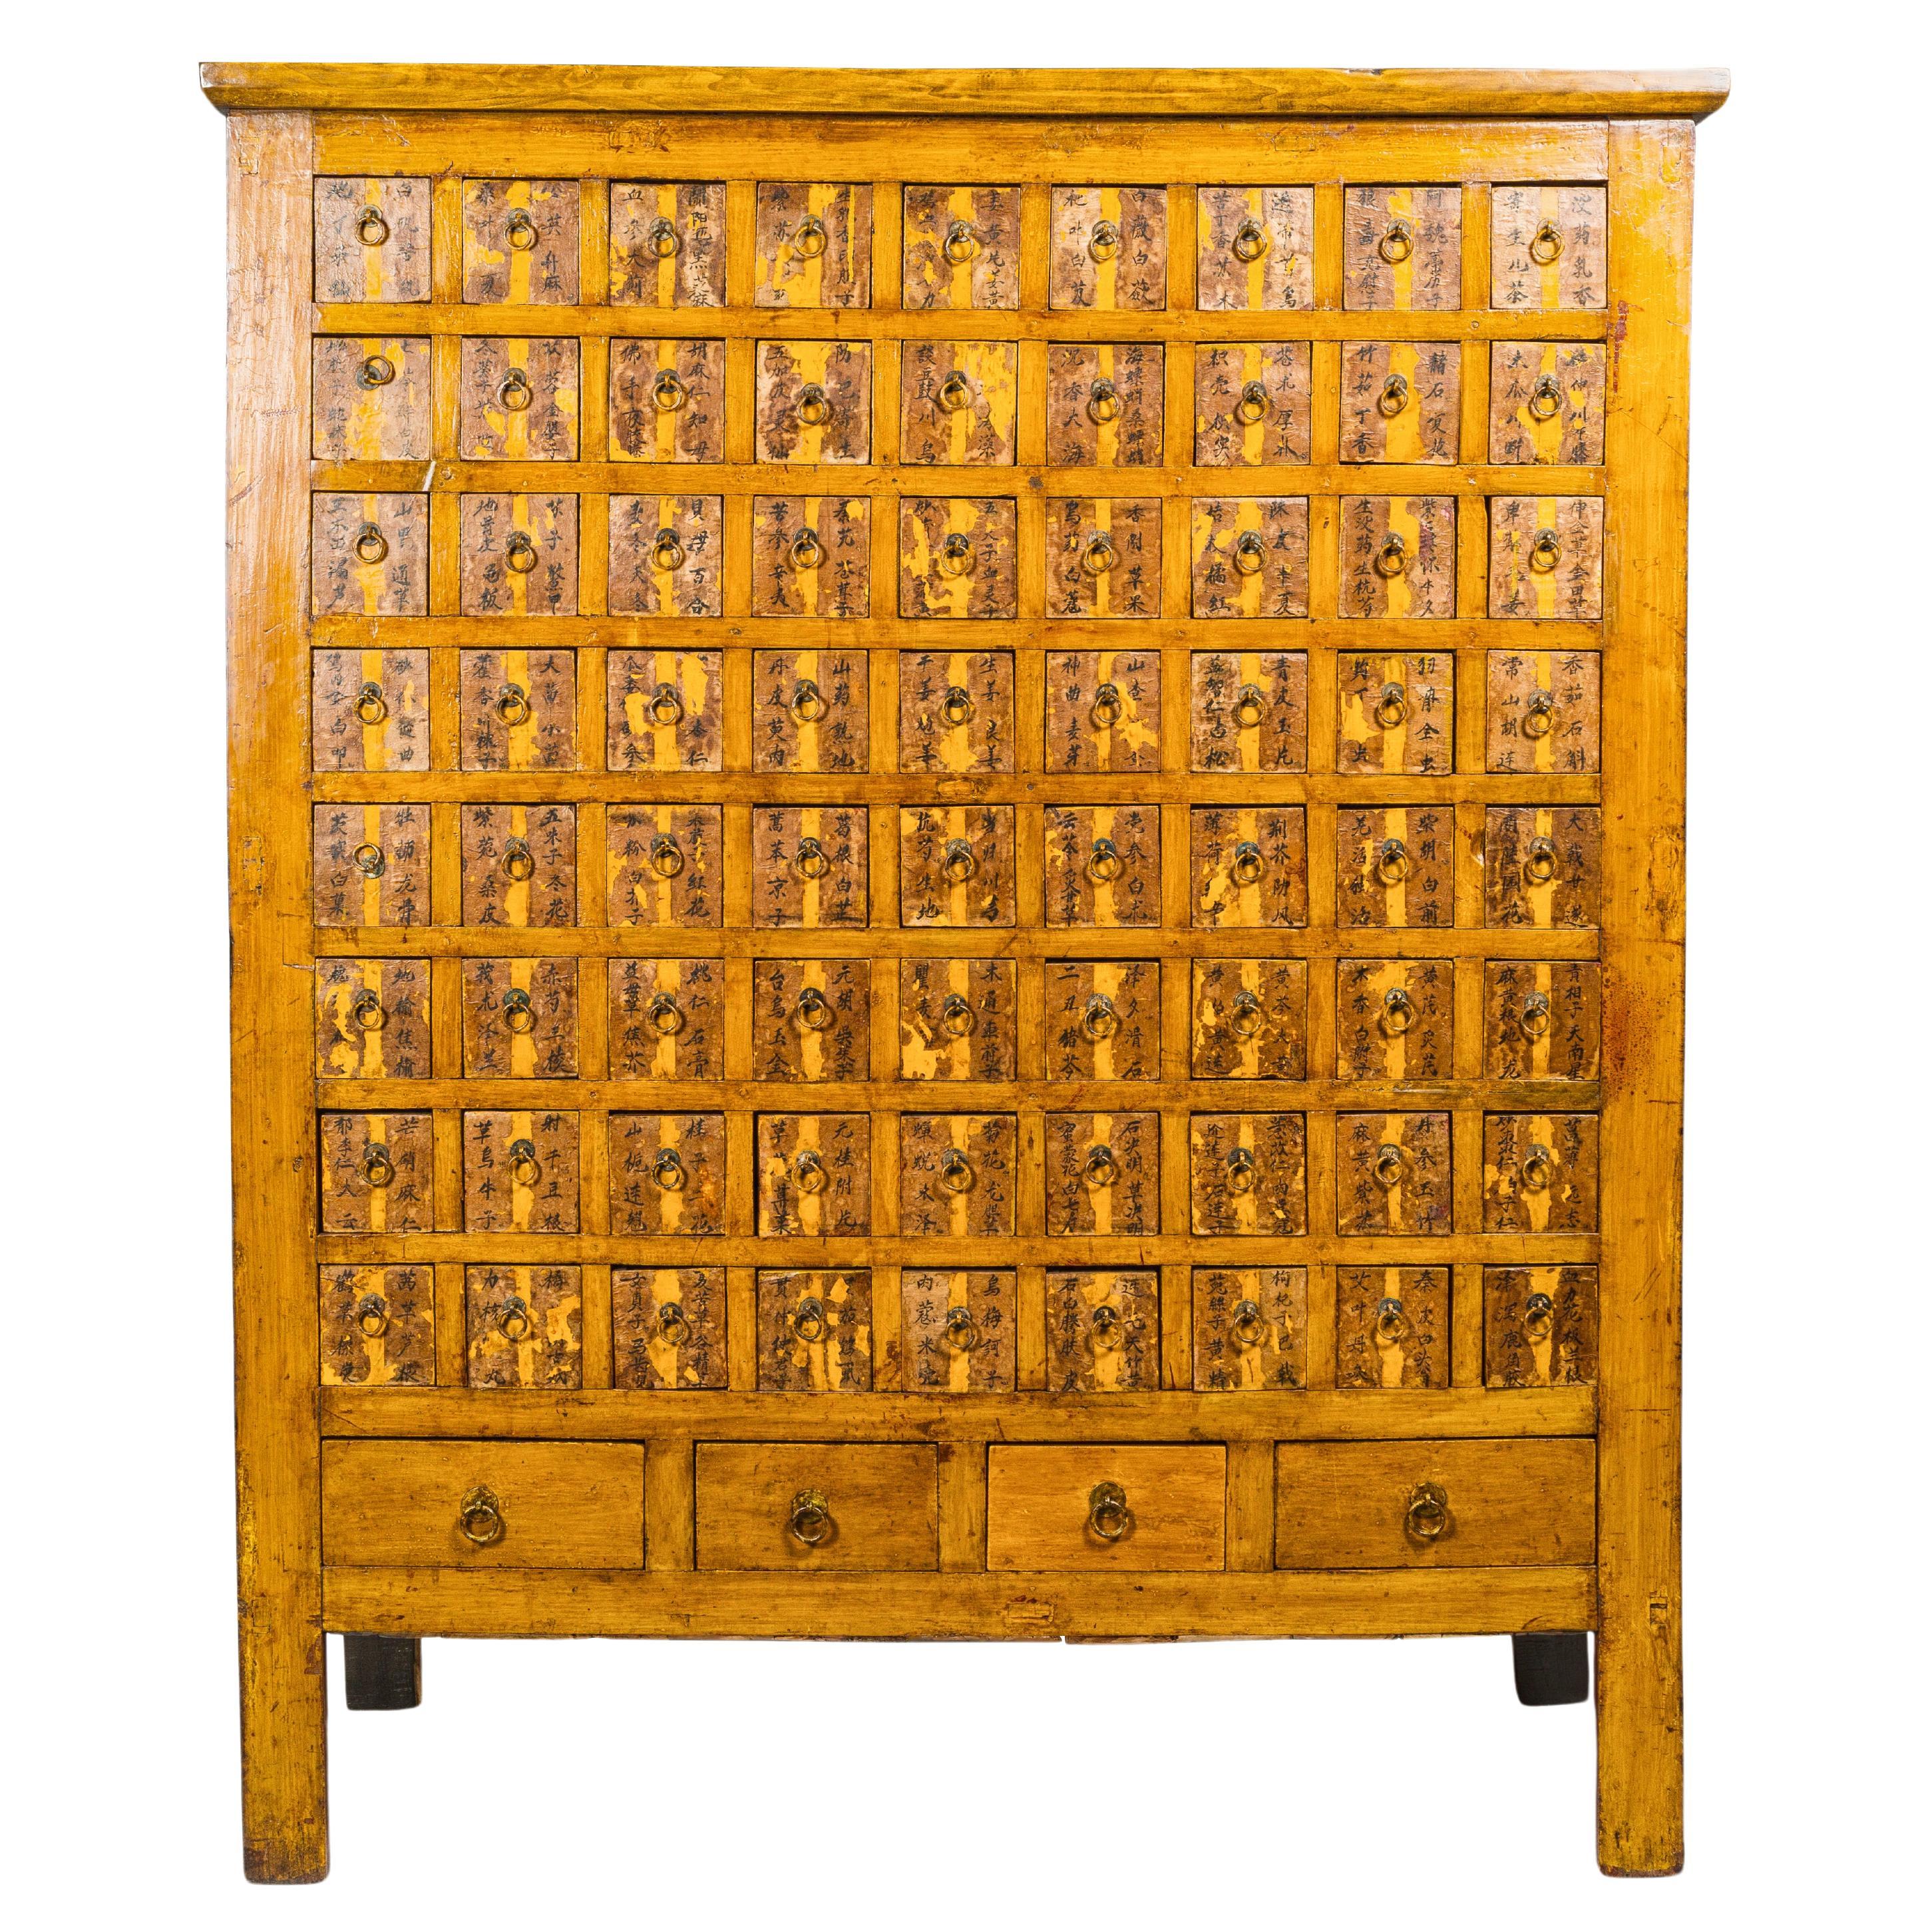 Oversized Qing Apothecary Cabinet with 76 Drawers and Chinese Calligraphy For Sale